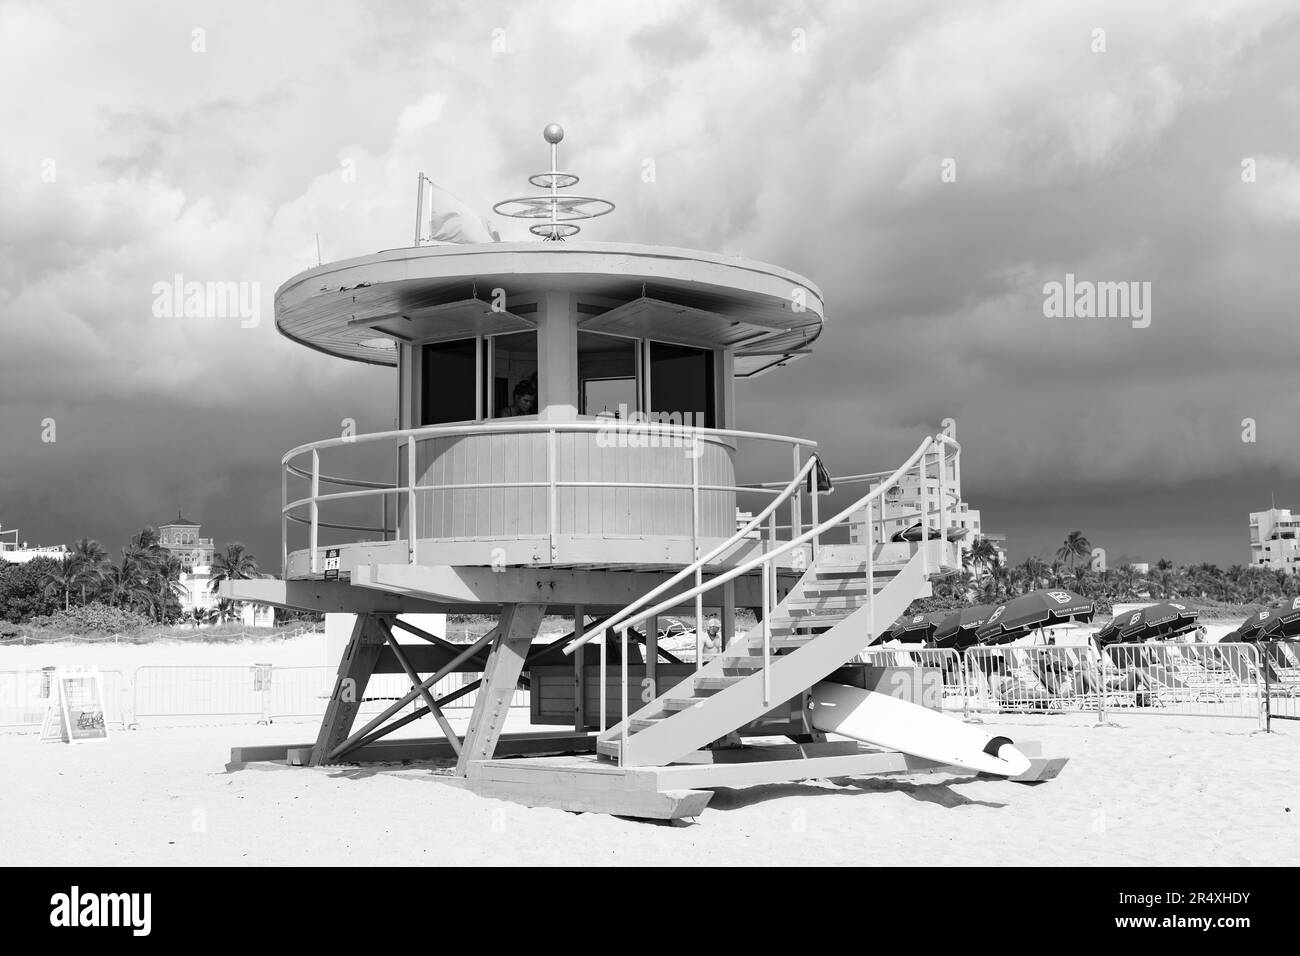 Miami, USA - March 19, 2021: miami beach lifeguard house on sand in south beach located in Florida in the United States. Stock Photo